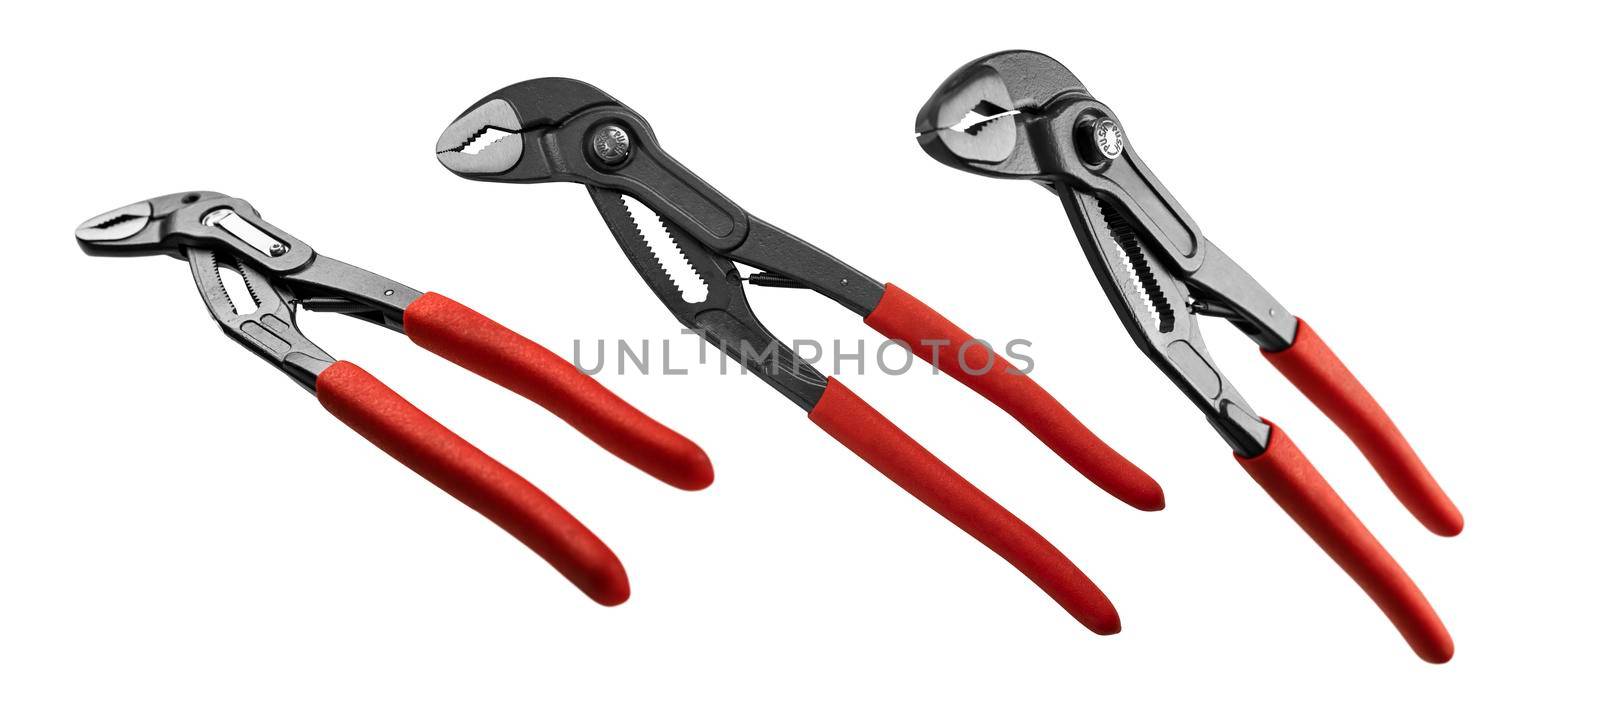 Adjustable wrench in different angles on a white background.